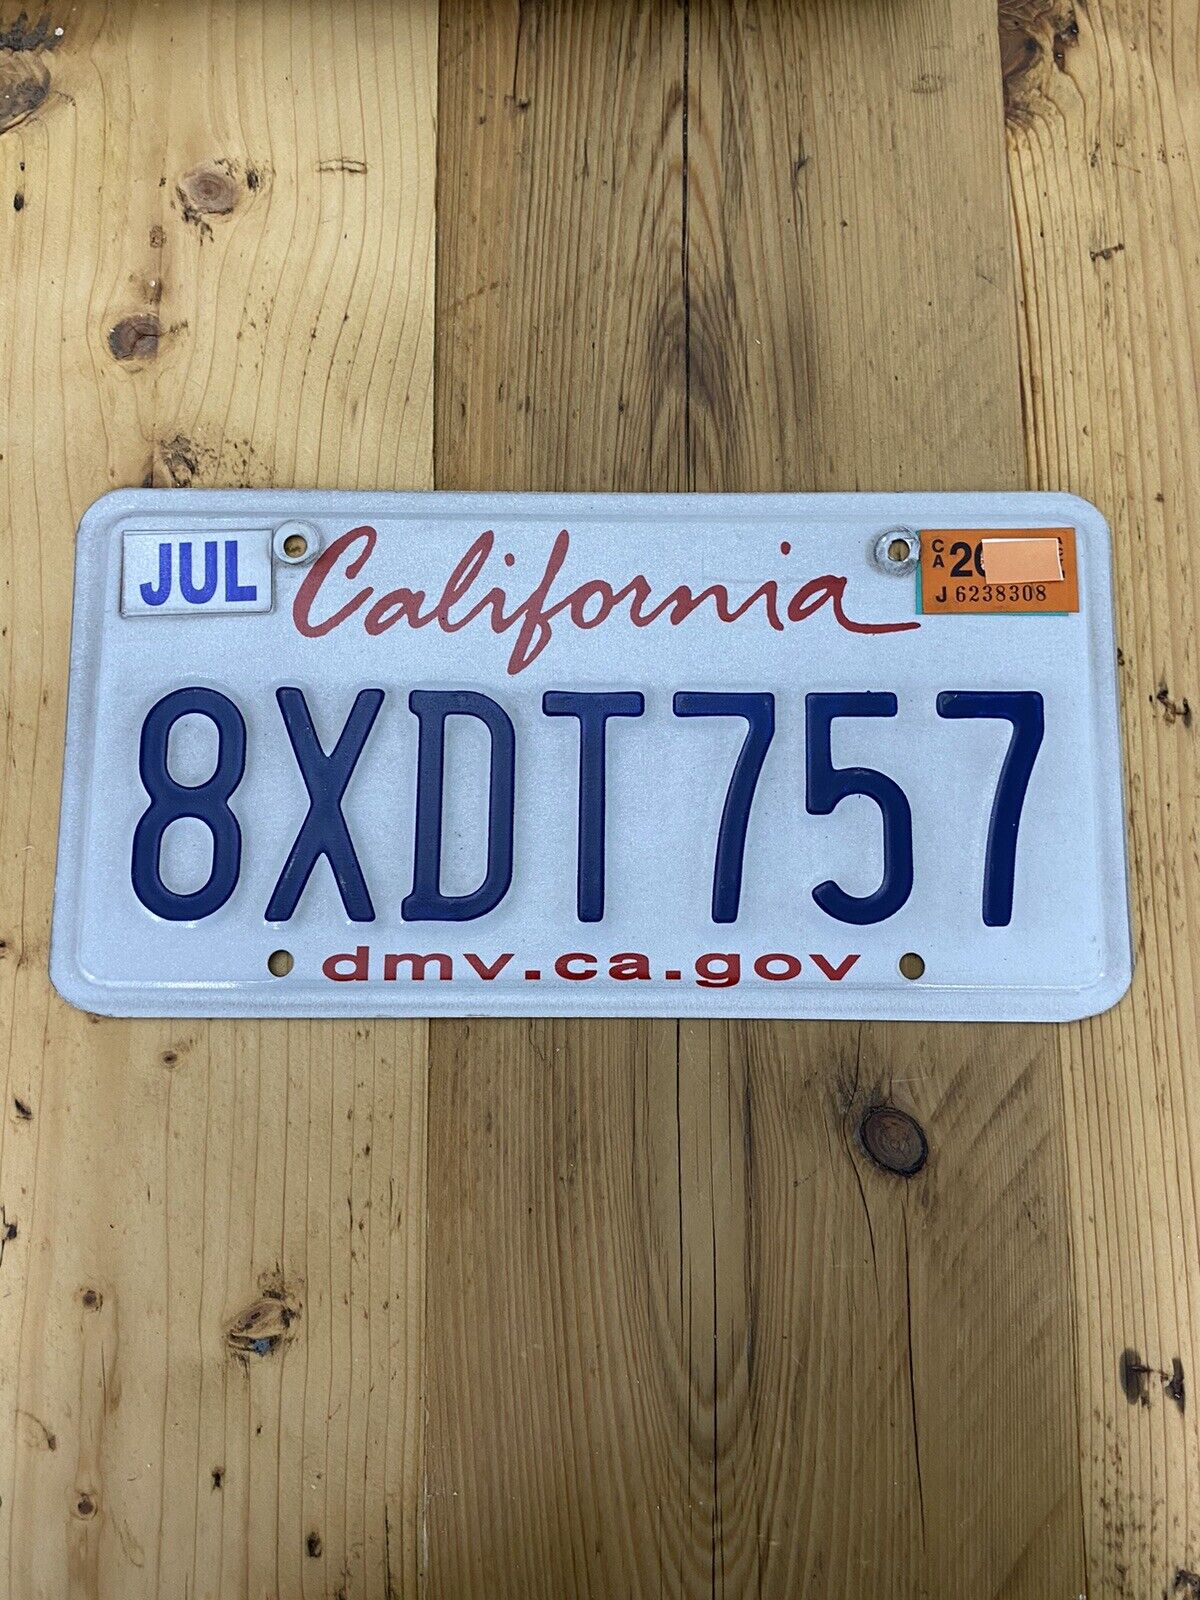 Vintage California Classic US Car License Number Plate 8XDT757